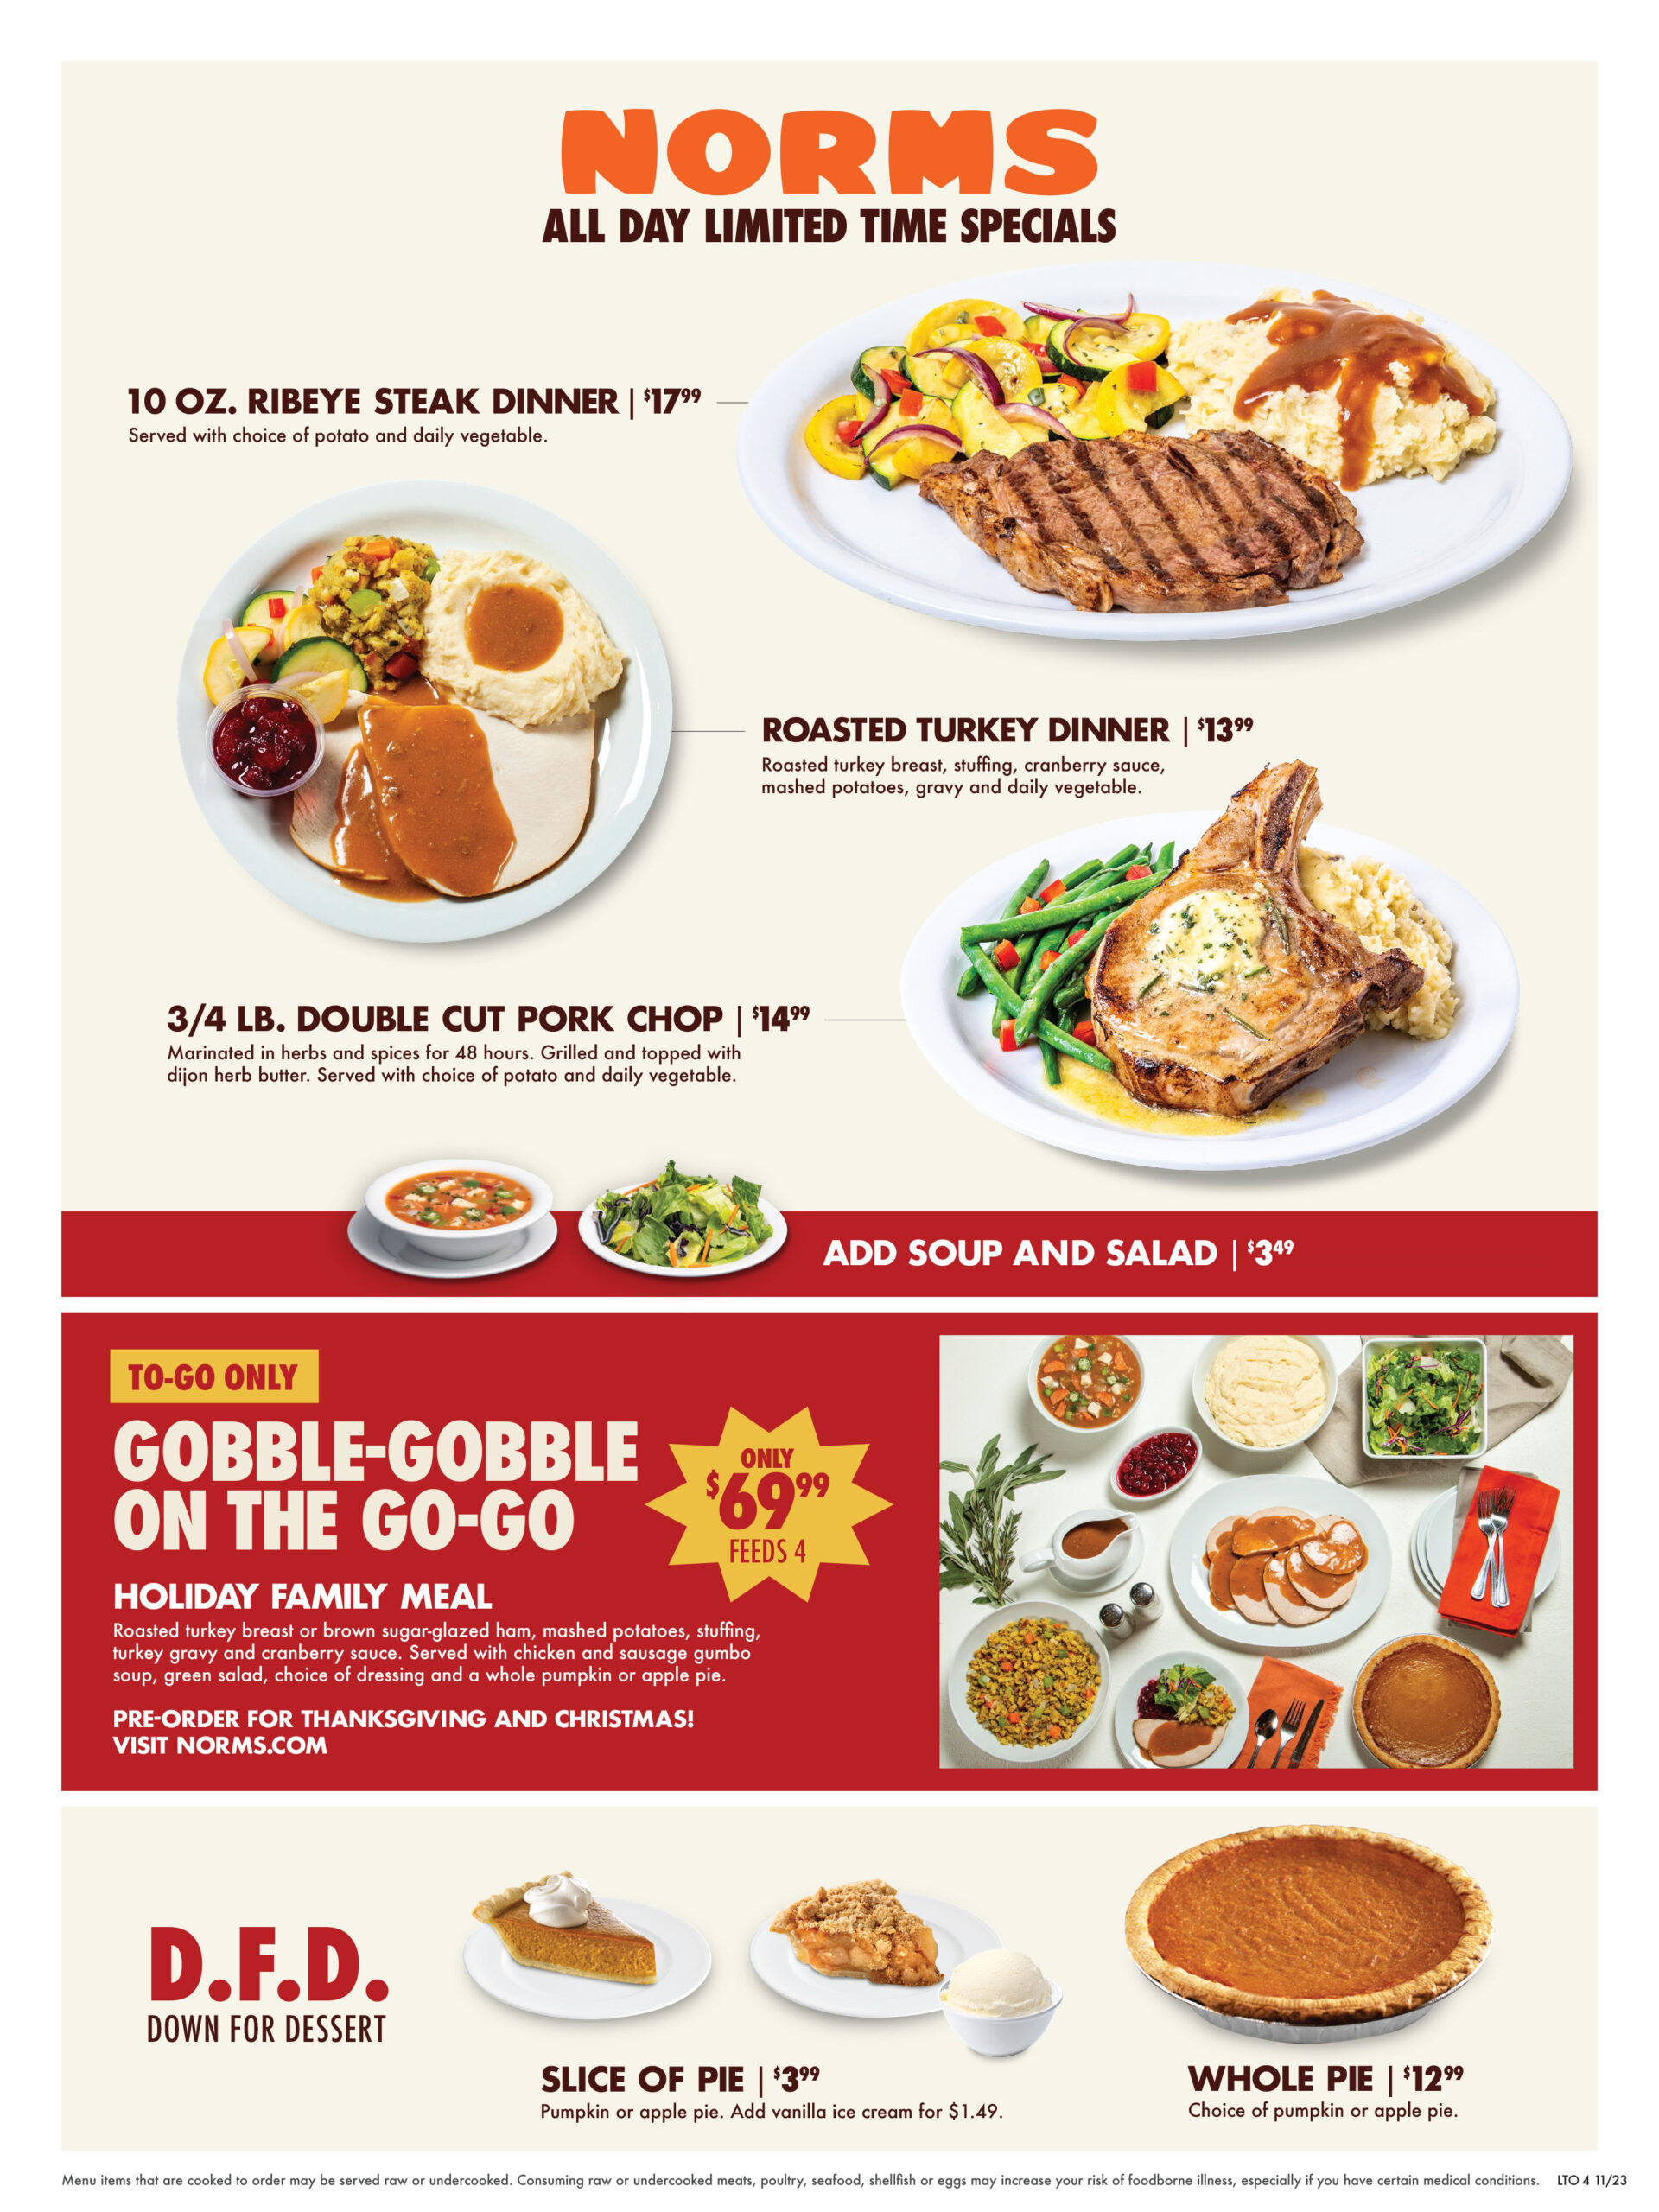 LIMITED TIME MENU - NORMS Restaurants